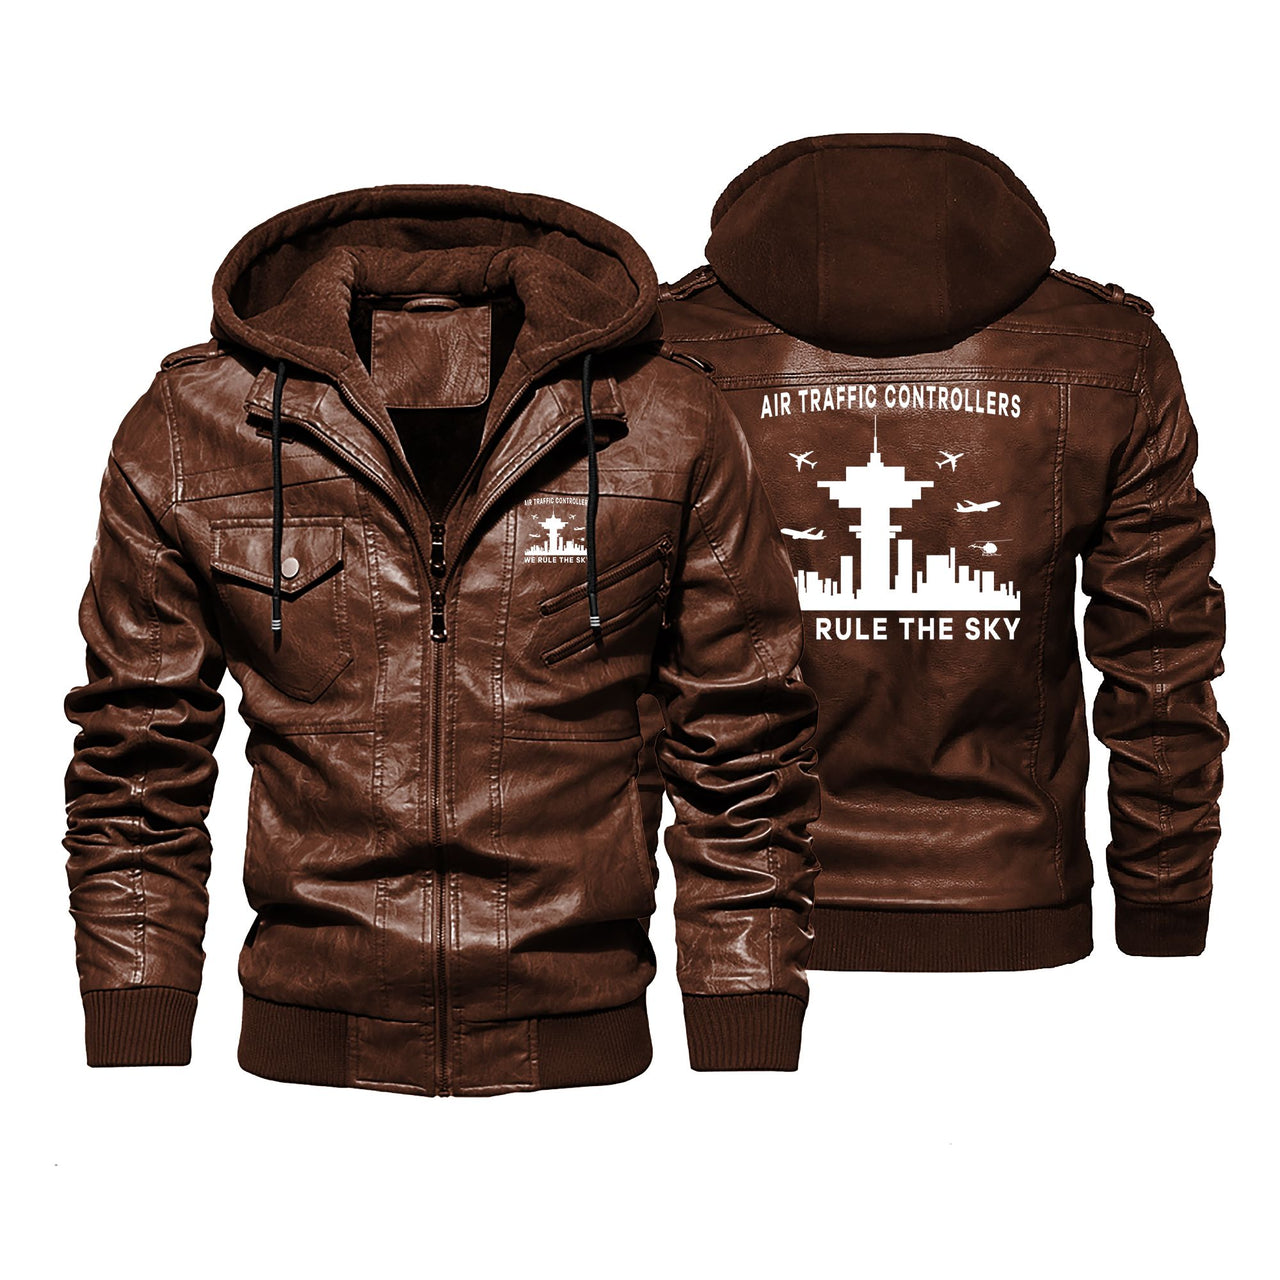 Air Traffic Controllers - We Rule The Sky Designed Hooded Leather Jackets